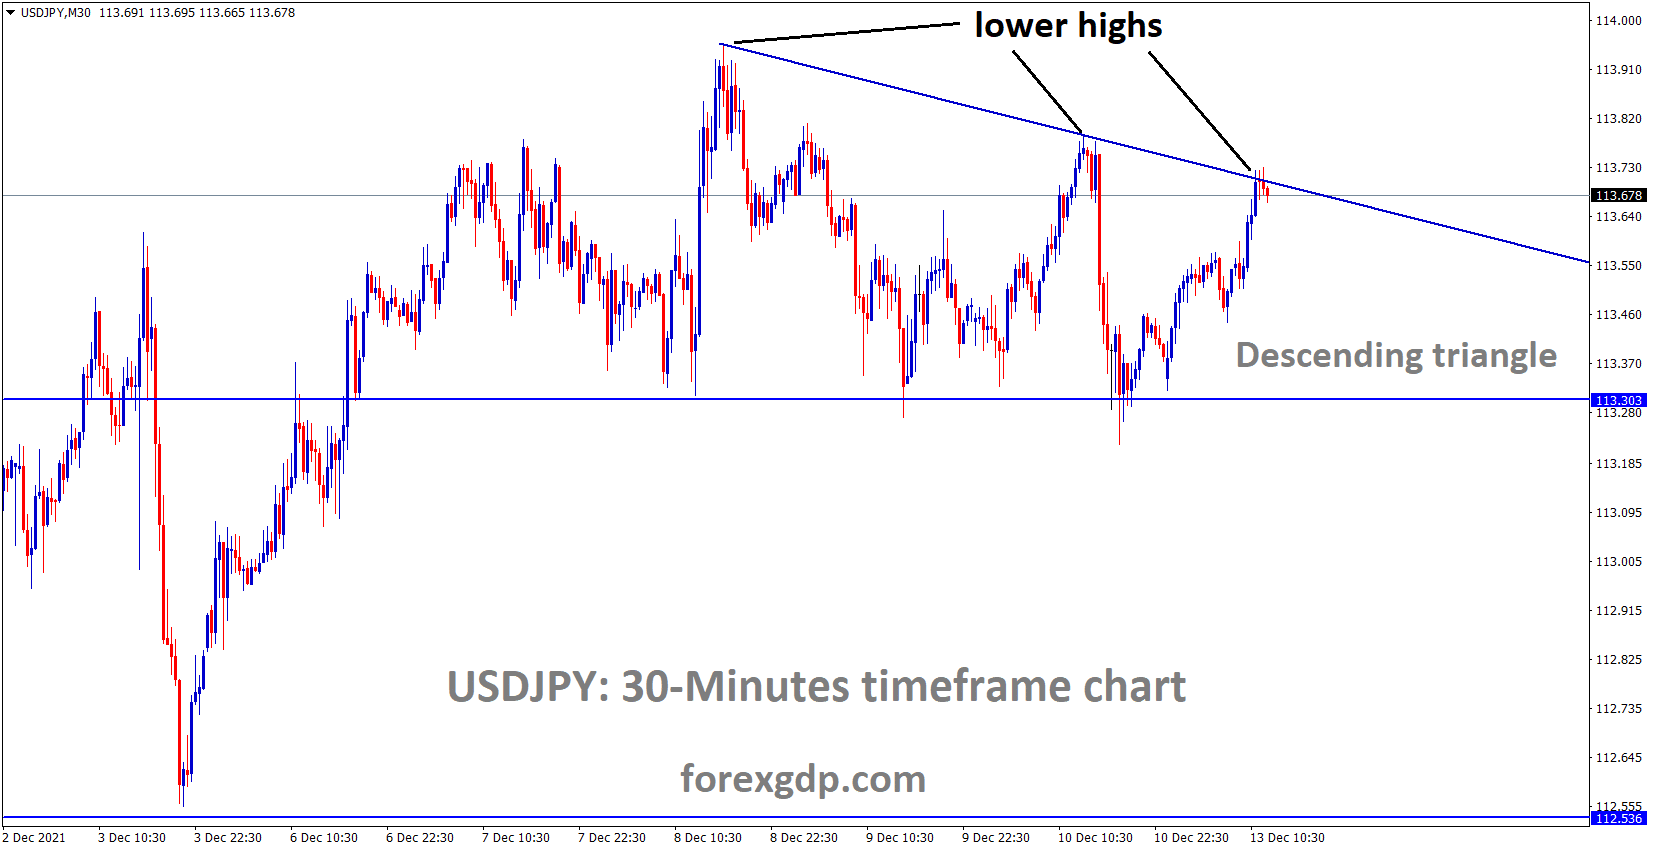 USDJPY is moving in the Descending triangle pattern and the market has reached the lower high area of the Triangle pattern